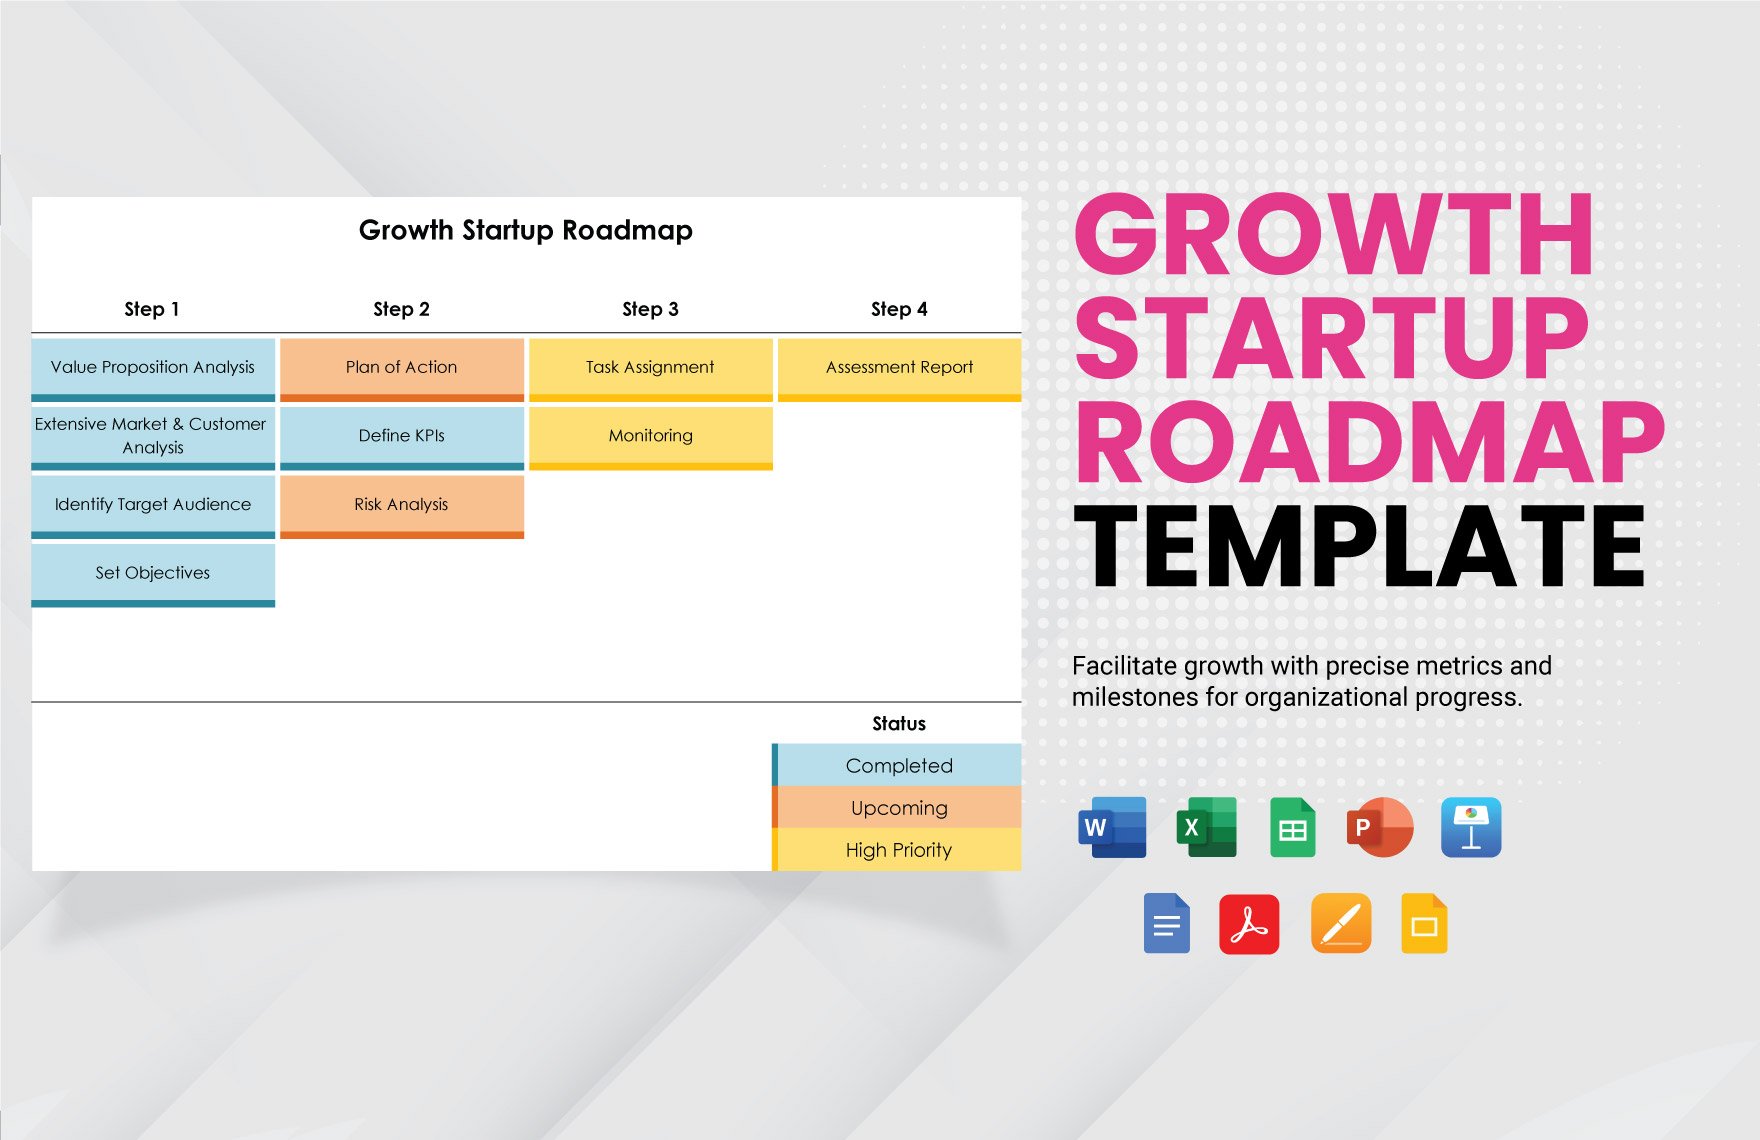 Growth Startup Roadmap Template